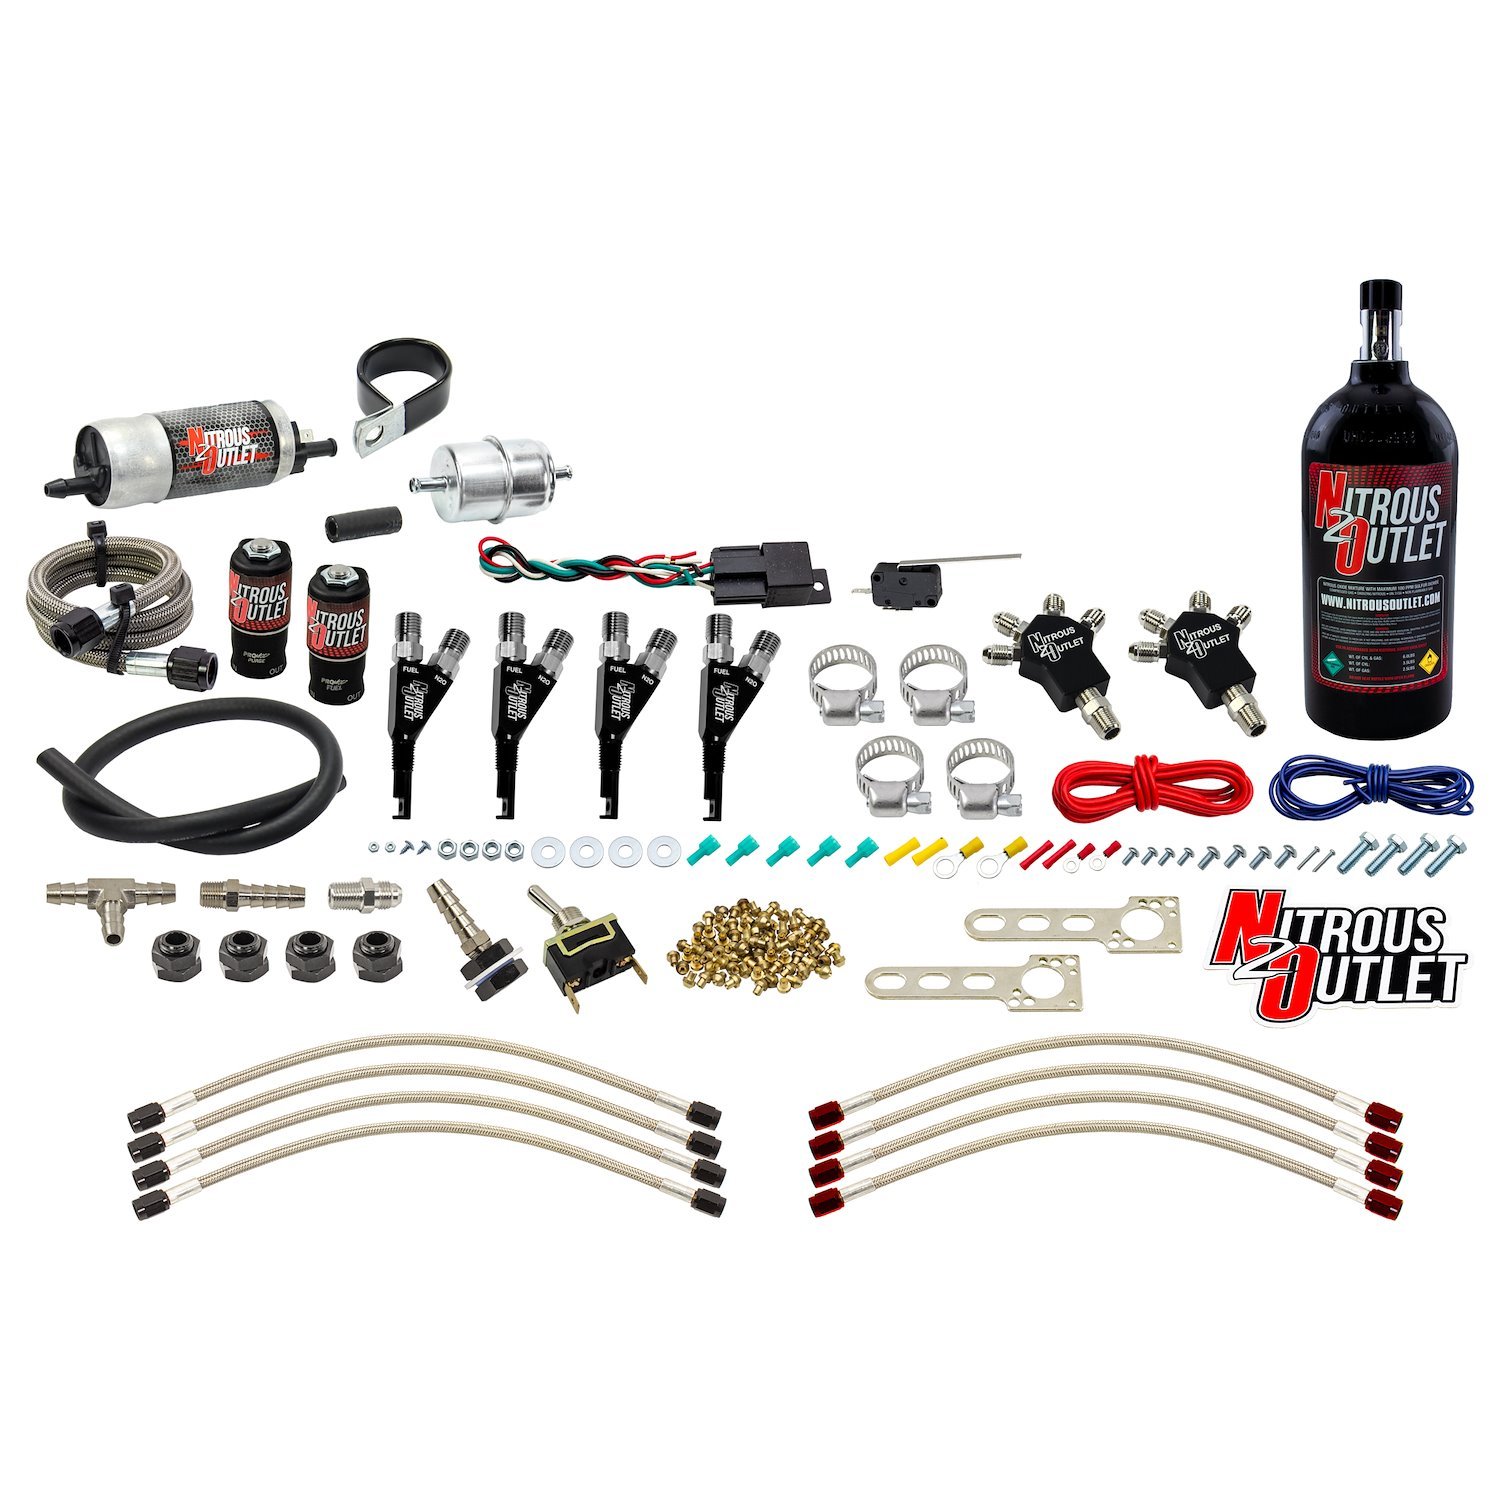 50-10042-2.5 Powersports 4-Cyl Wet Nozzle System, Stainless 90-Degree Nozzles, Gas, 6 psi, 406080100120 HP, 2.5LB Bottle